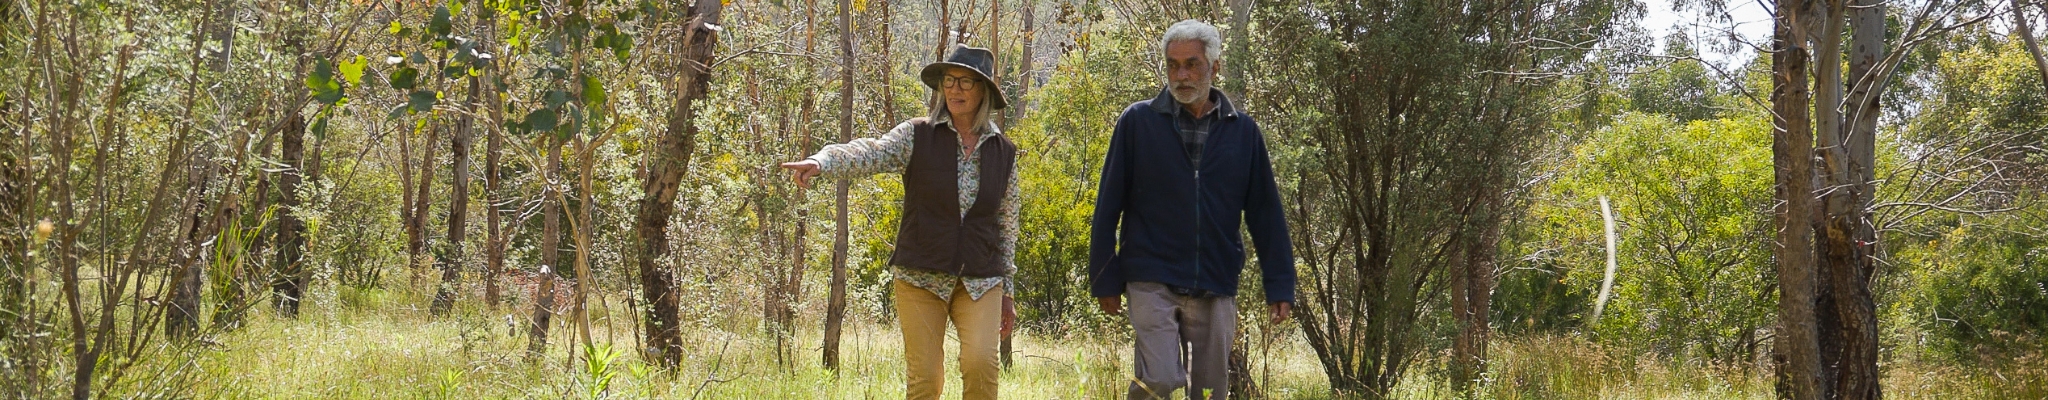 Two people walk through a property conserved for its native vegetation and Australian biodiversity.